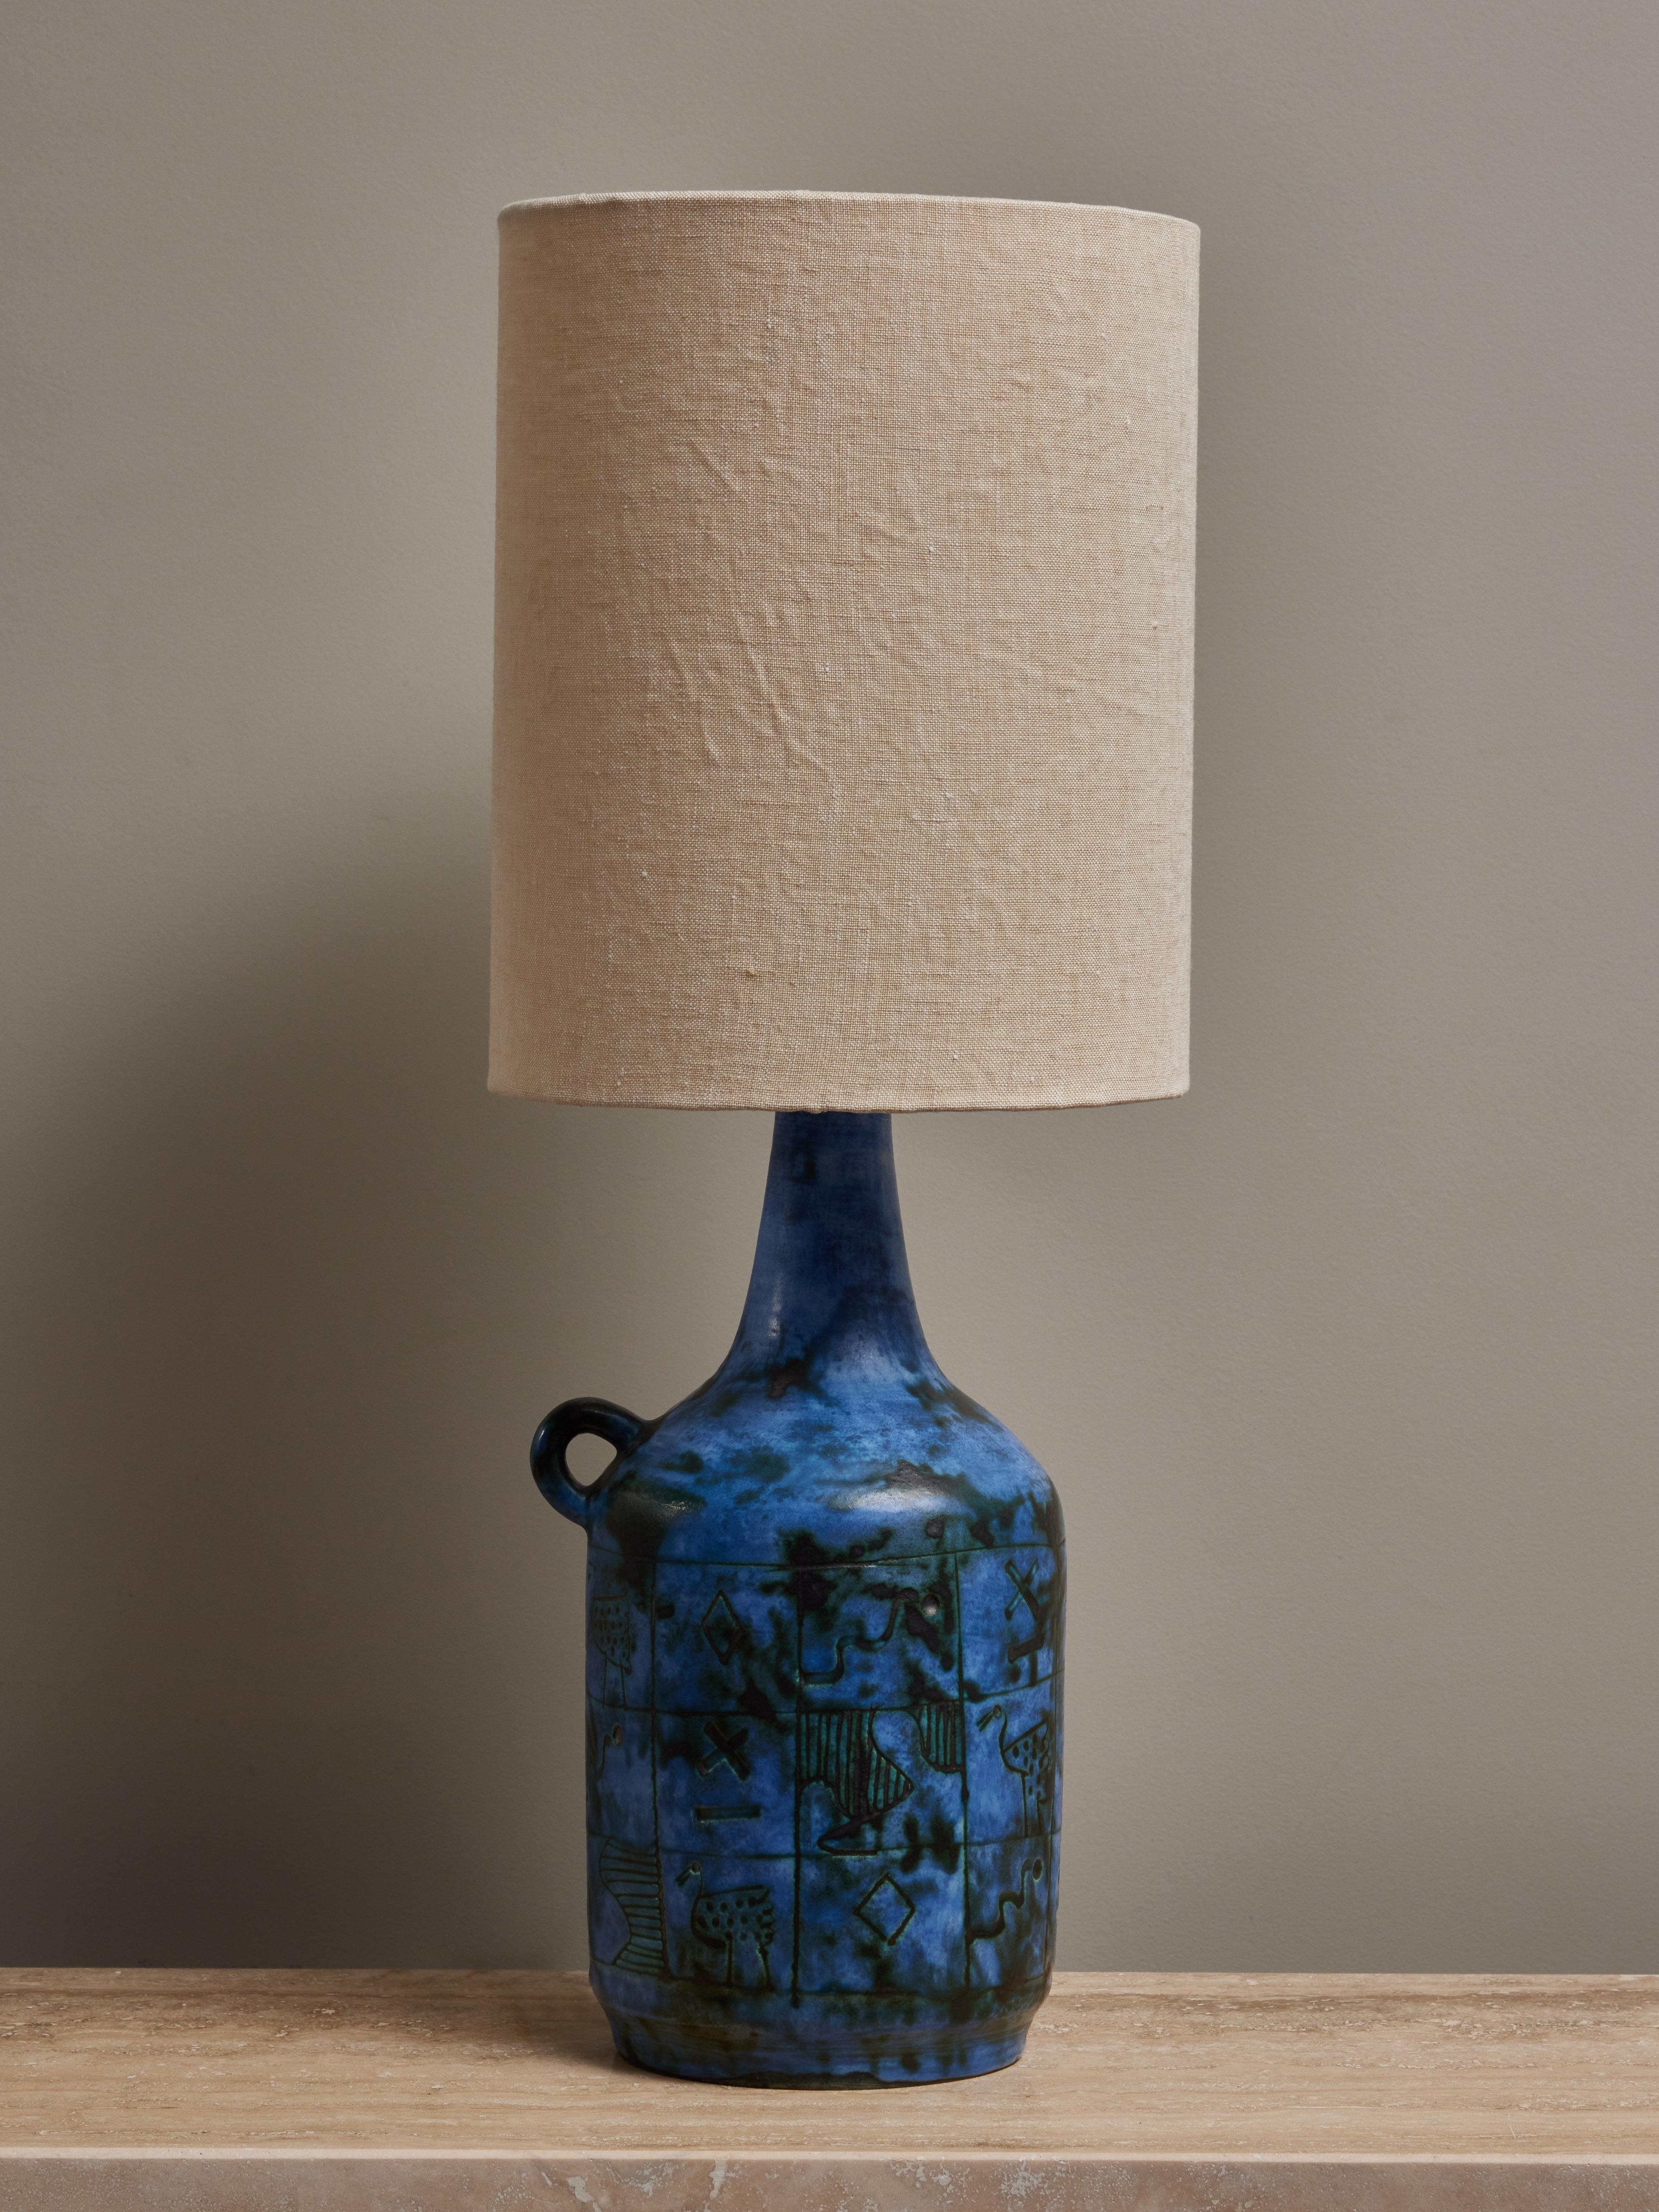 Blue ceramic table lamp by Jacques Blin, shaped as a bottle, with engraved stylized animals and geometrical patterns.

Signed at the bottom, new lampshade.

 

Jacques Blin (1920-1995) Jacques Blin is a well-known French ceramist who started as an